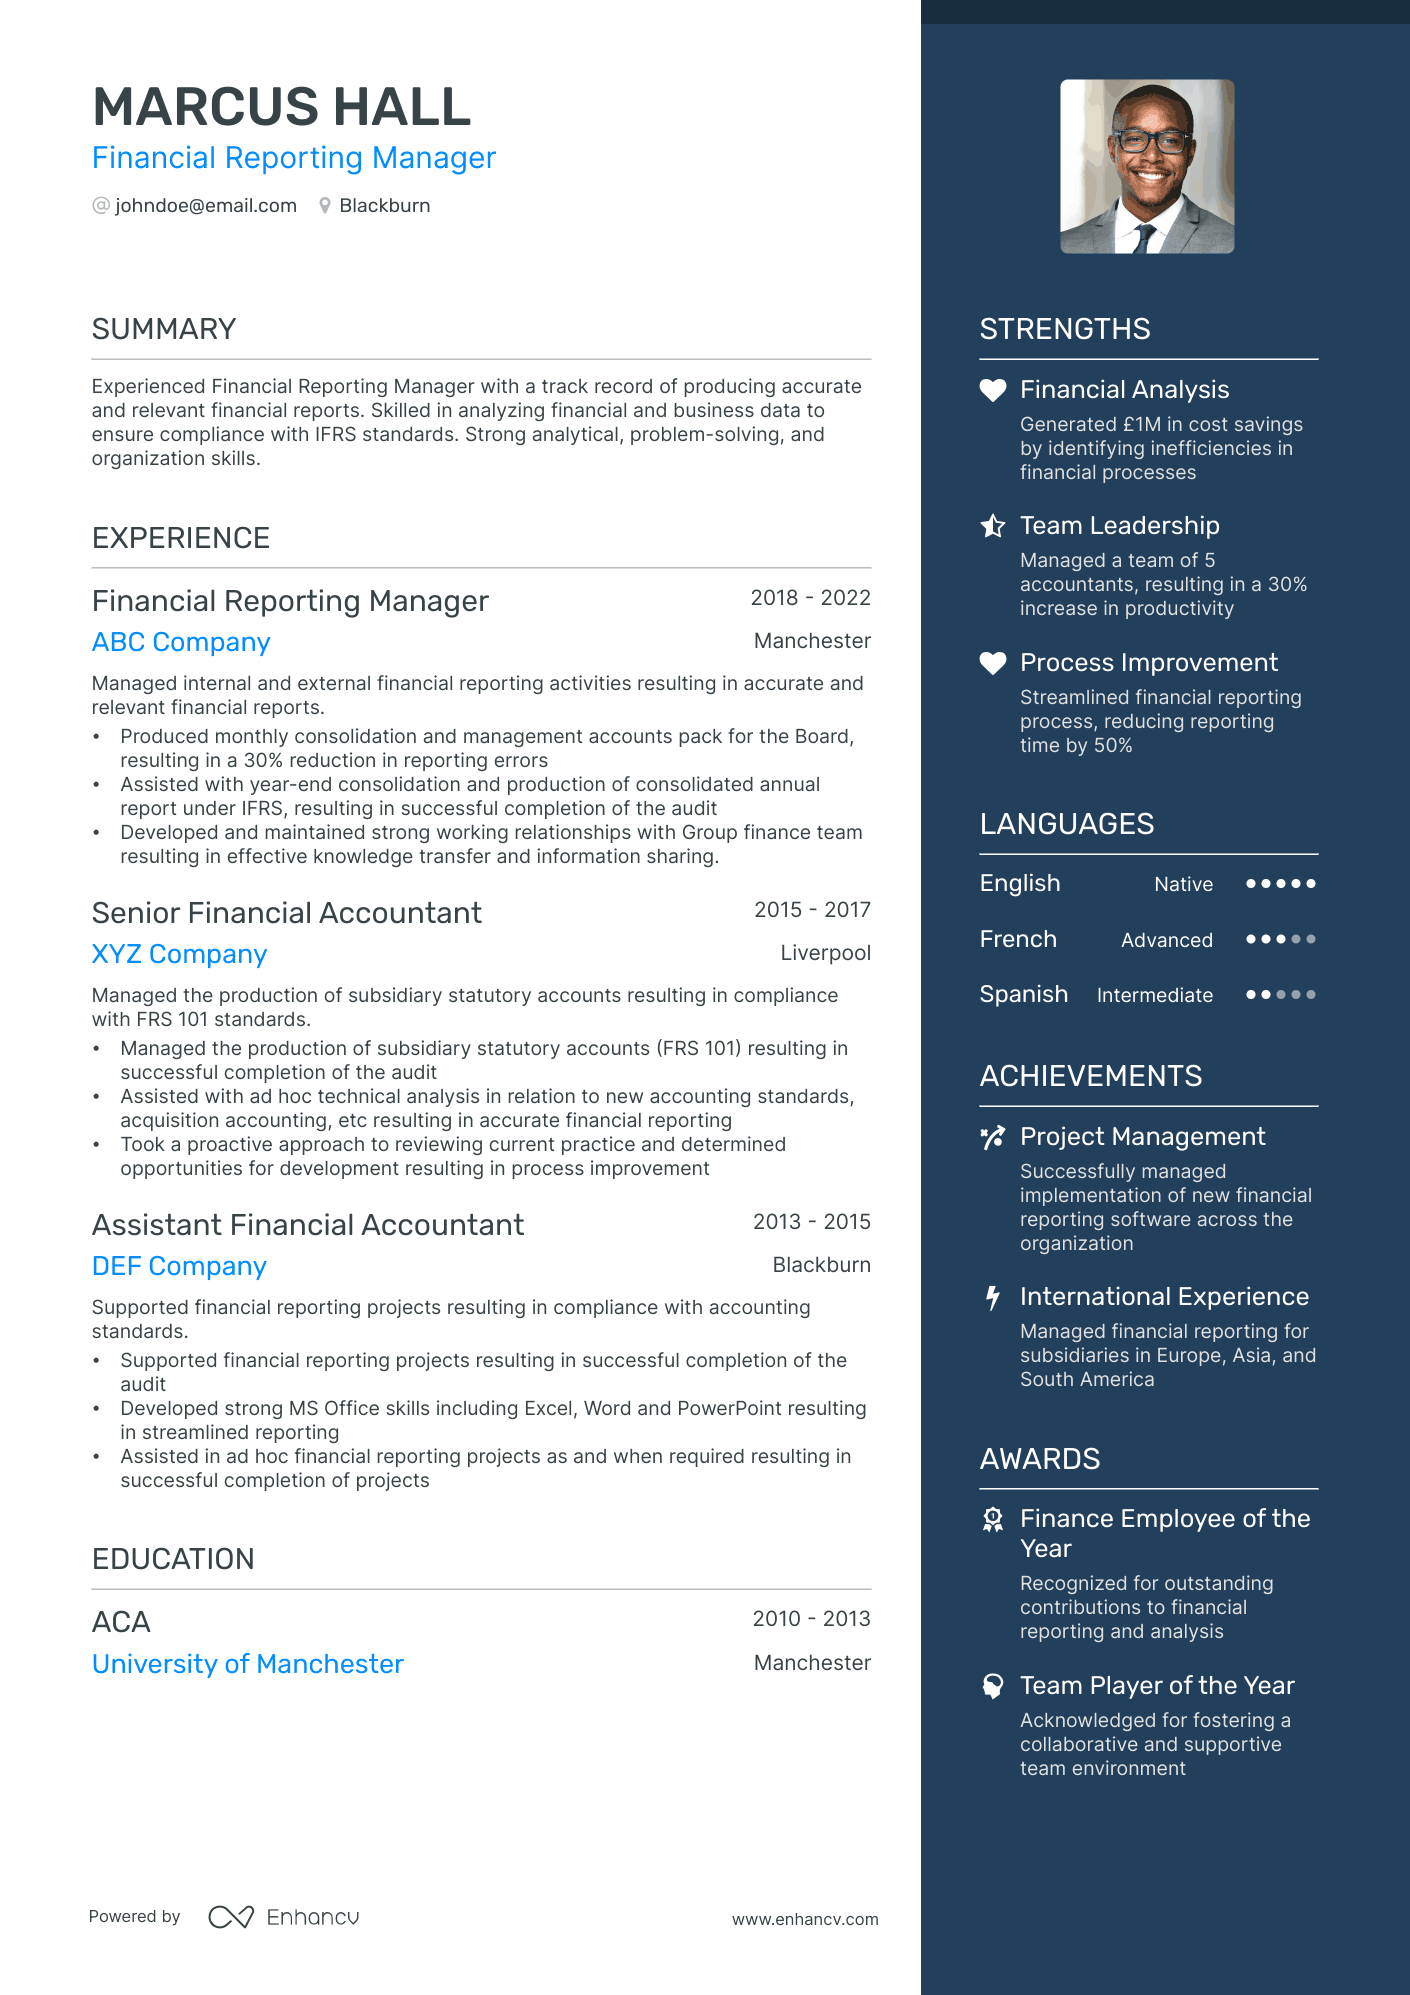 Financial Reporting Manager resume example